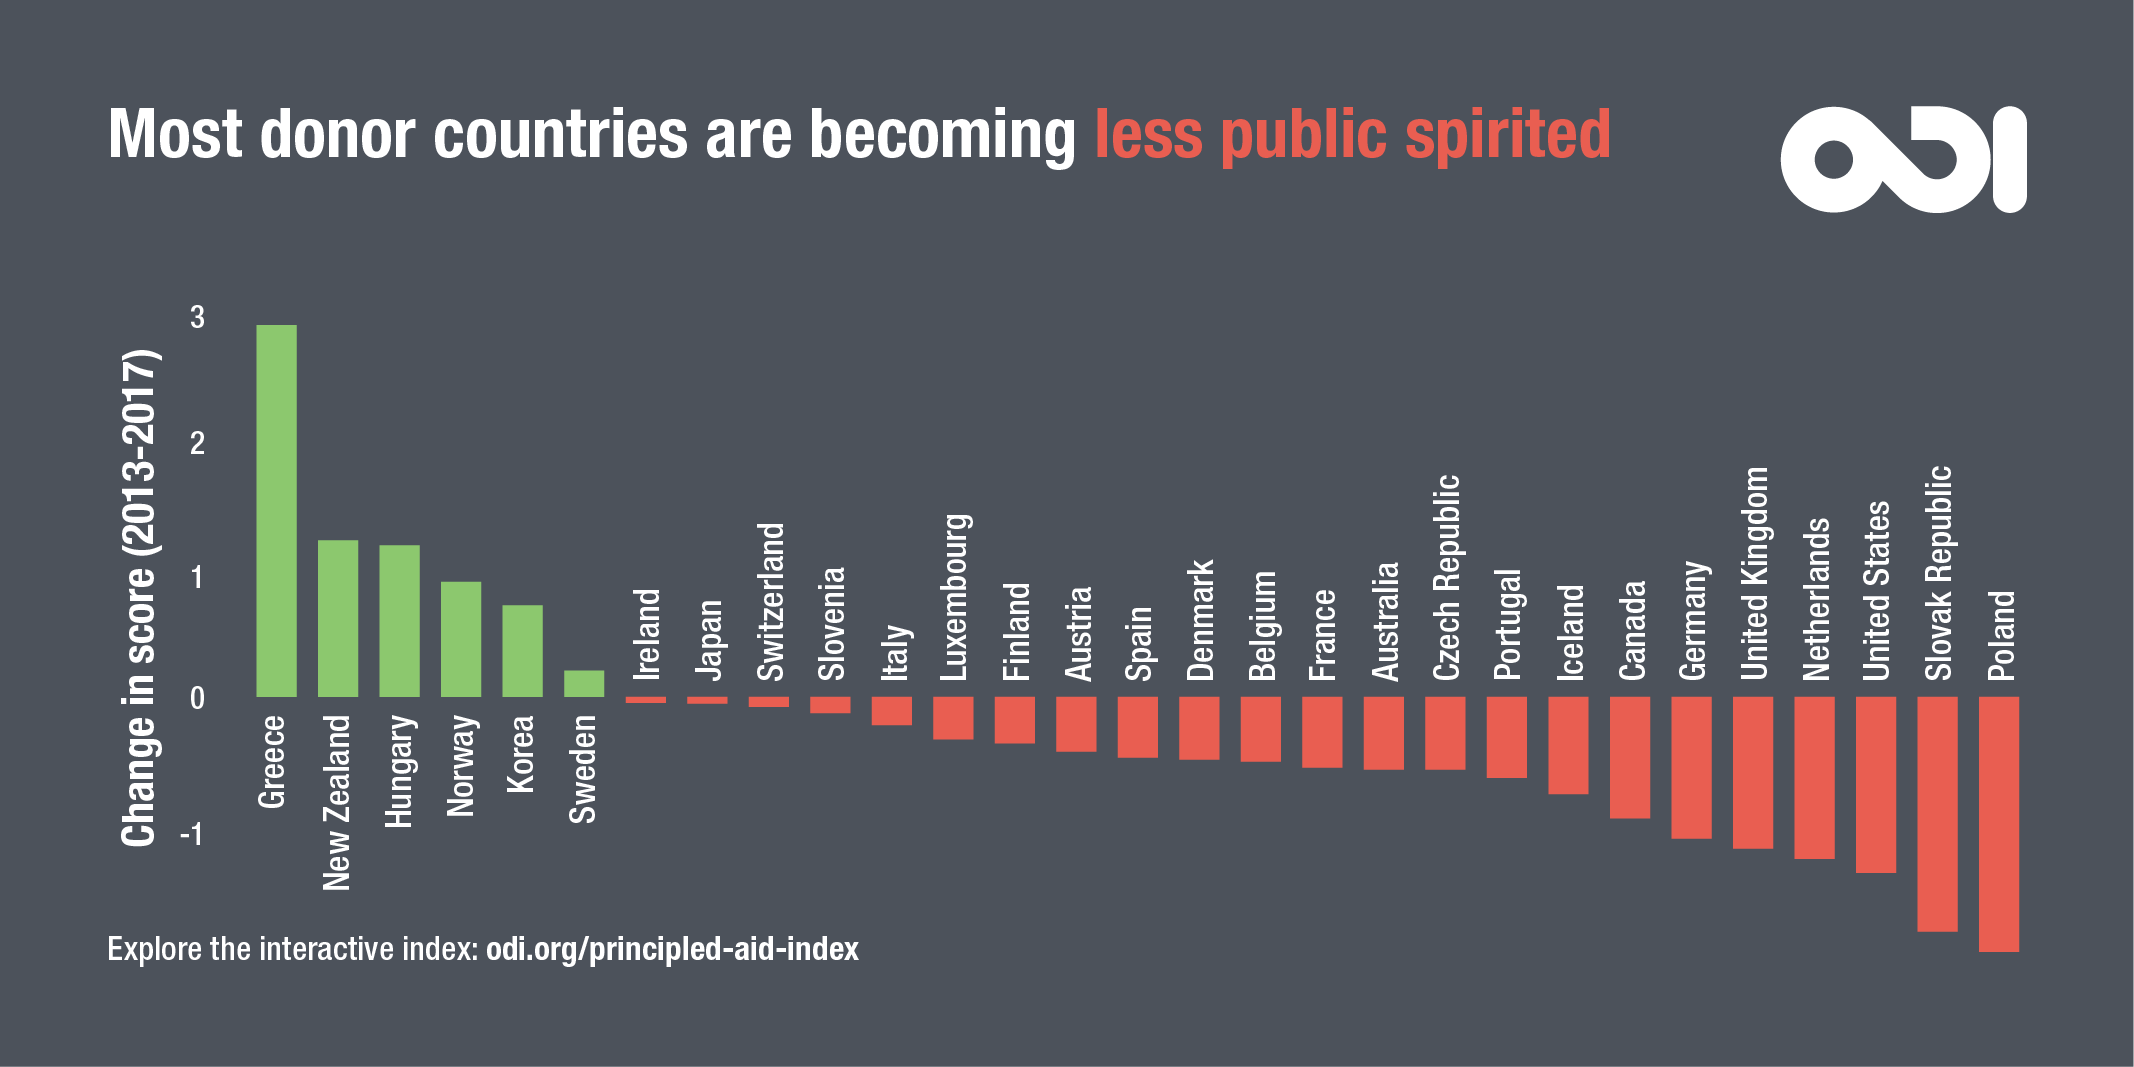 Most donors are becoming less public spirited